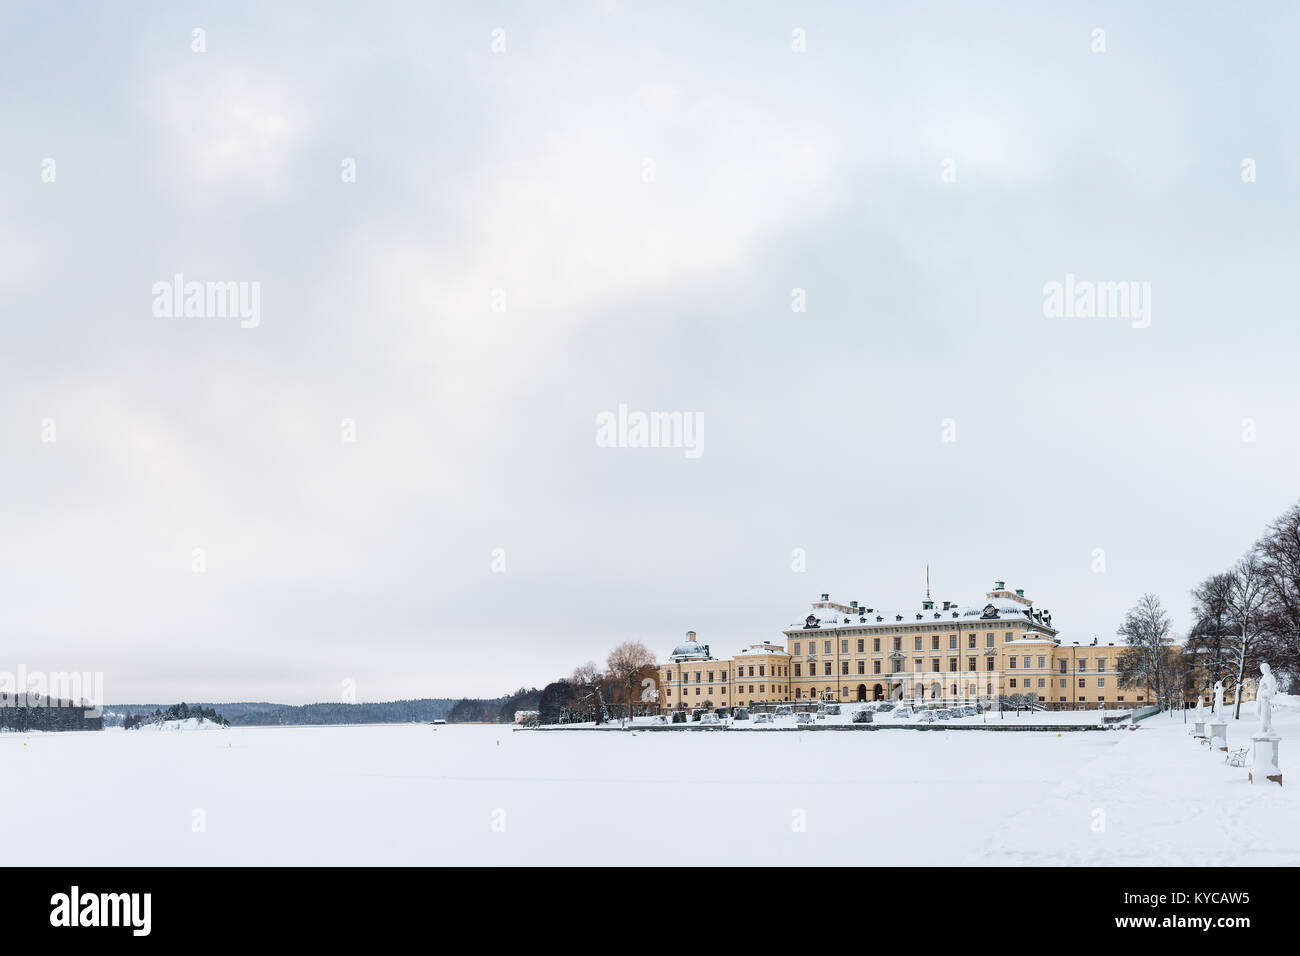 STOCKHOLM, SWEDEN - JANUARY 7, 2017: View over Drottningholm Palace and lake on a winter day. Home residence of Swedish royal family. Famous landmark  Stock Photo